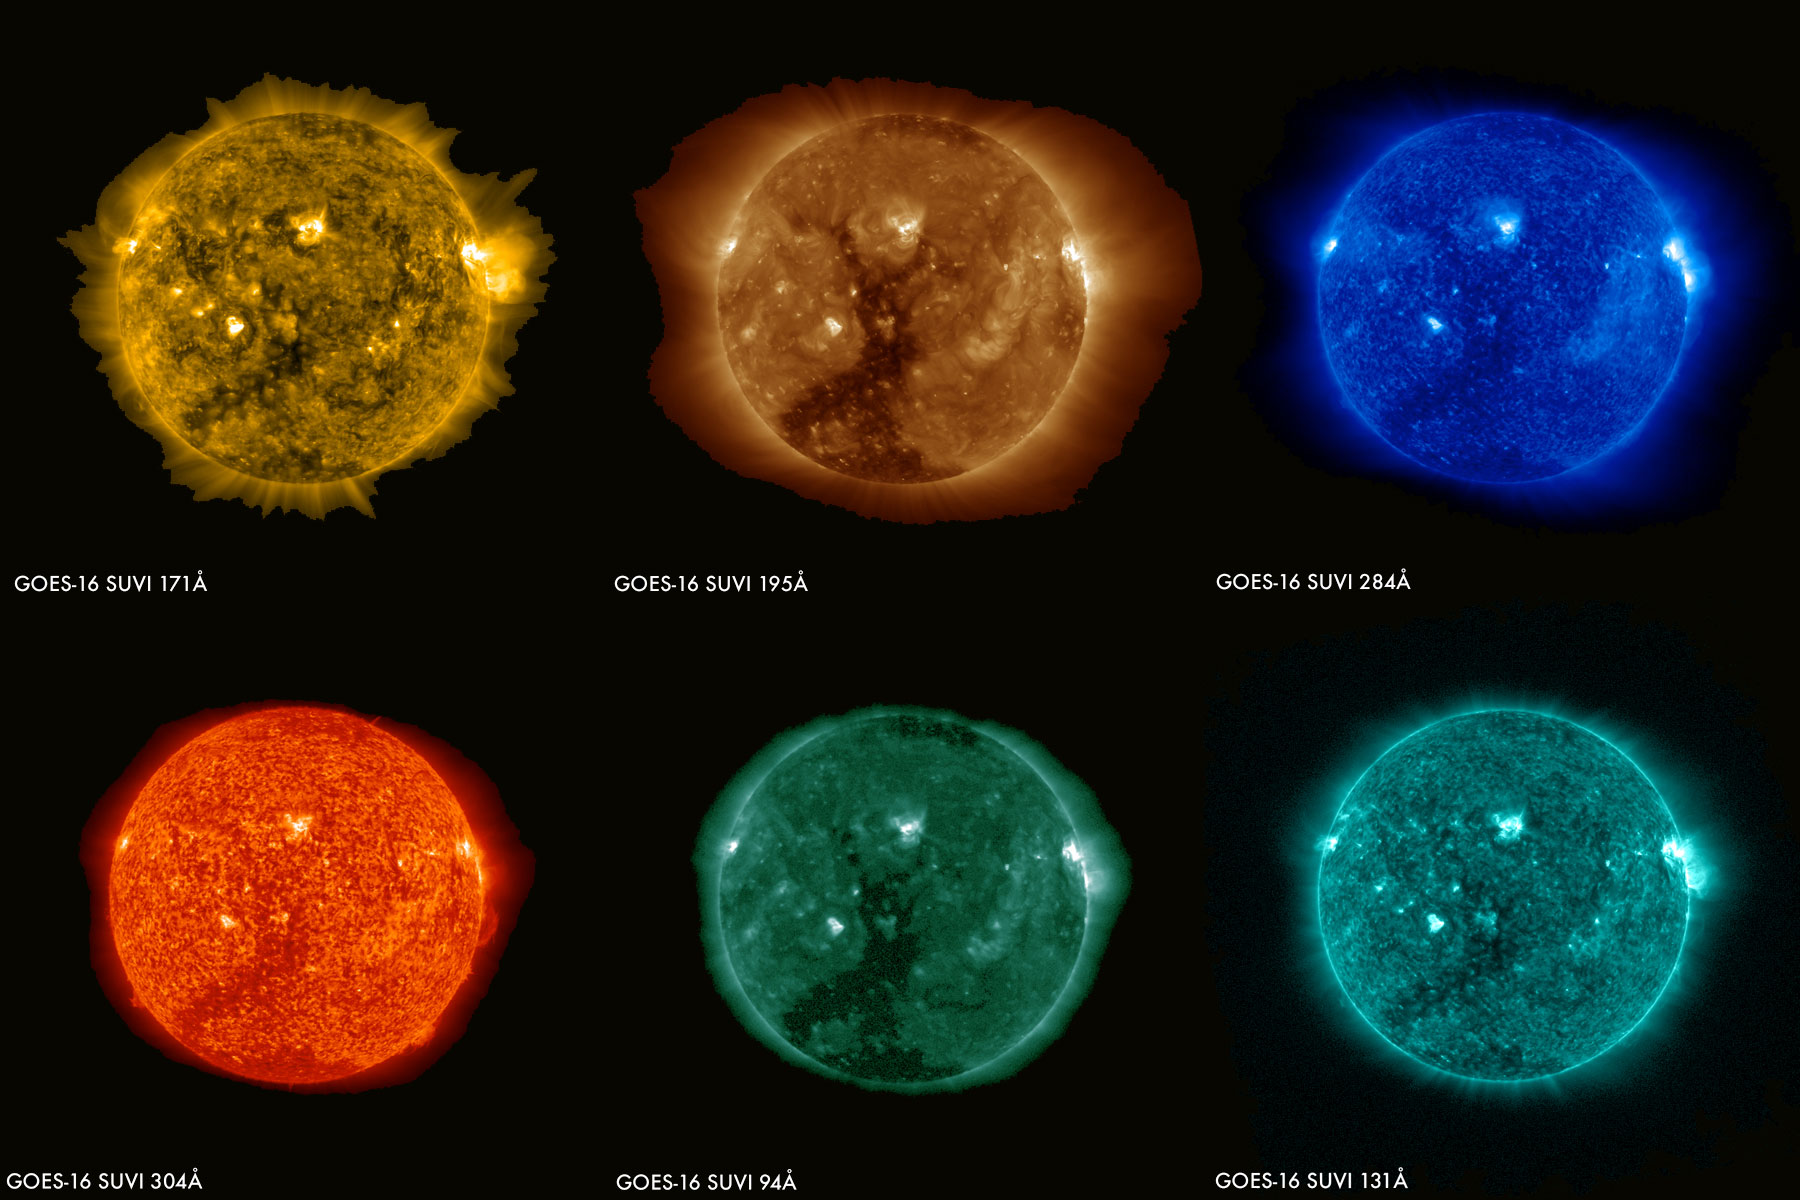 Images of the sun captured at the same time on January 29, 2017 by the six channels on the SUVI instrument on board GOES-16.